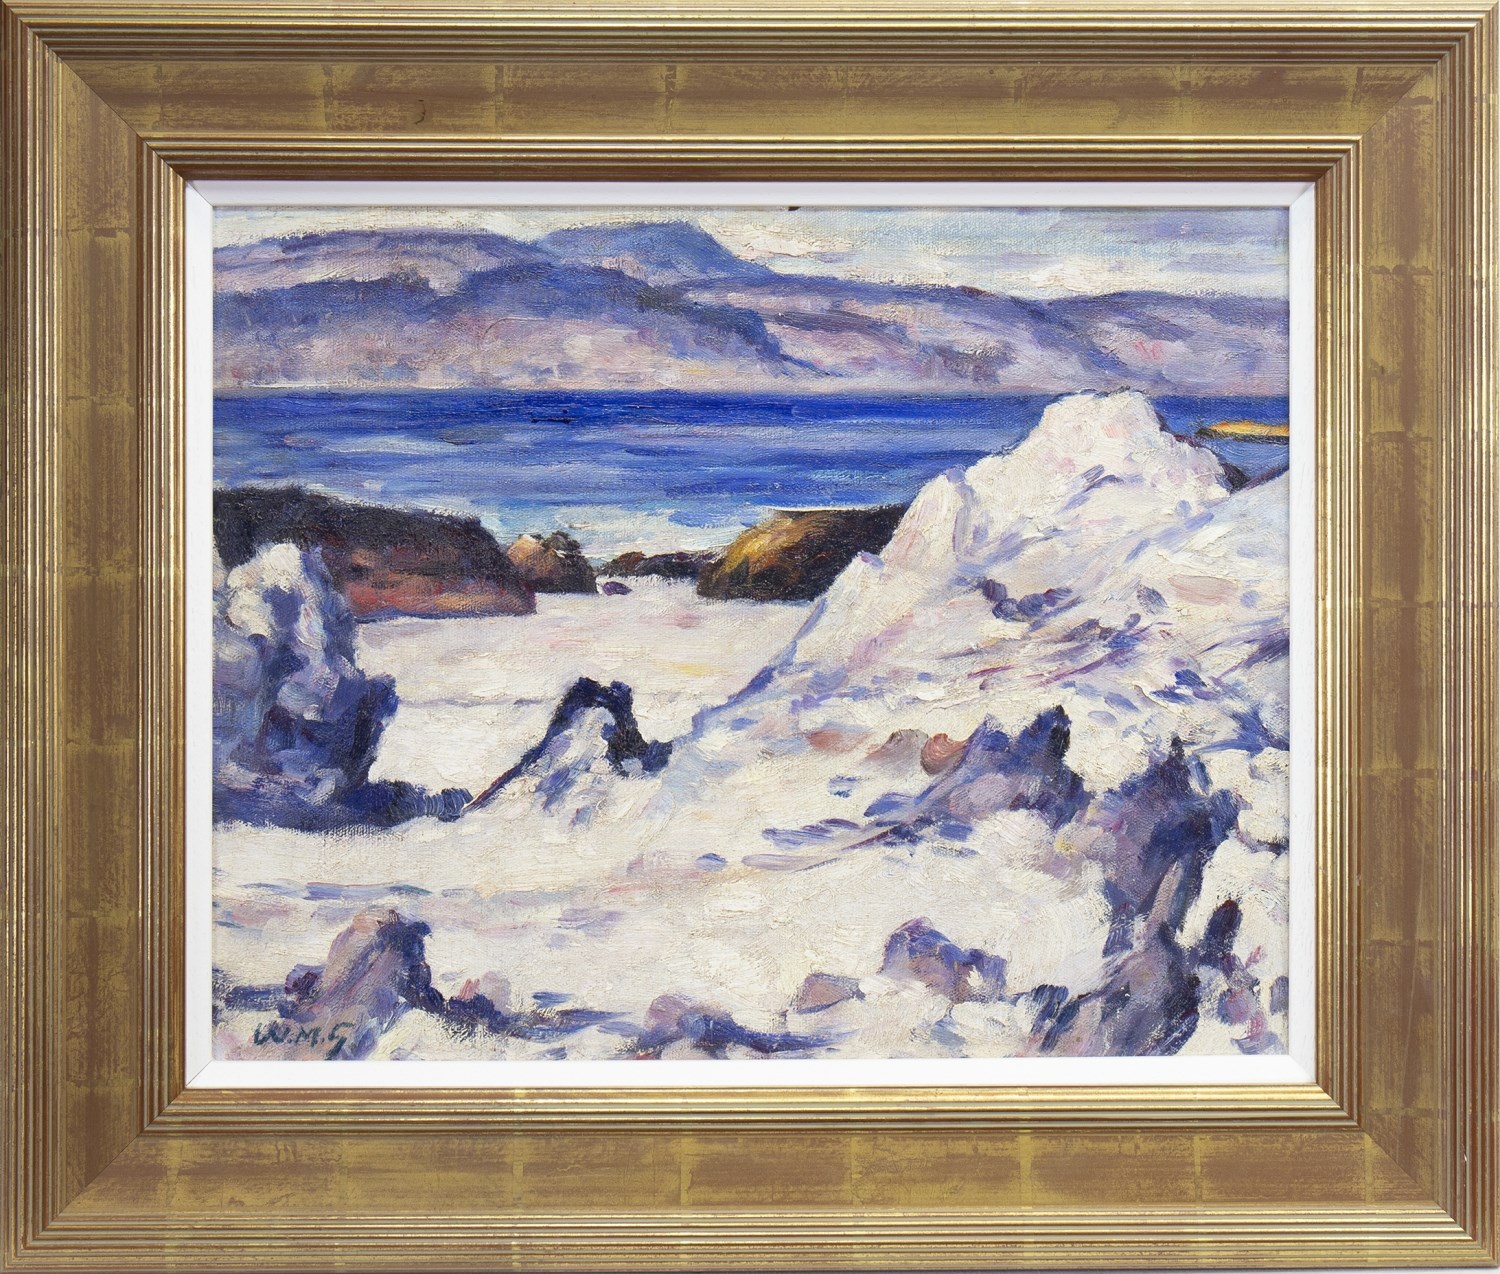 IONA SHORE, AN OIL ATTRIBUTED TO WILLIAM MERVYN GLASS